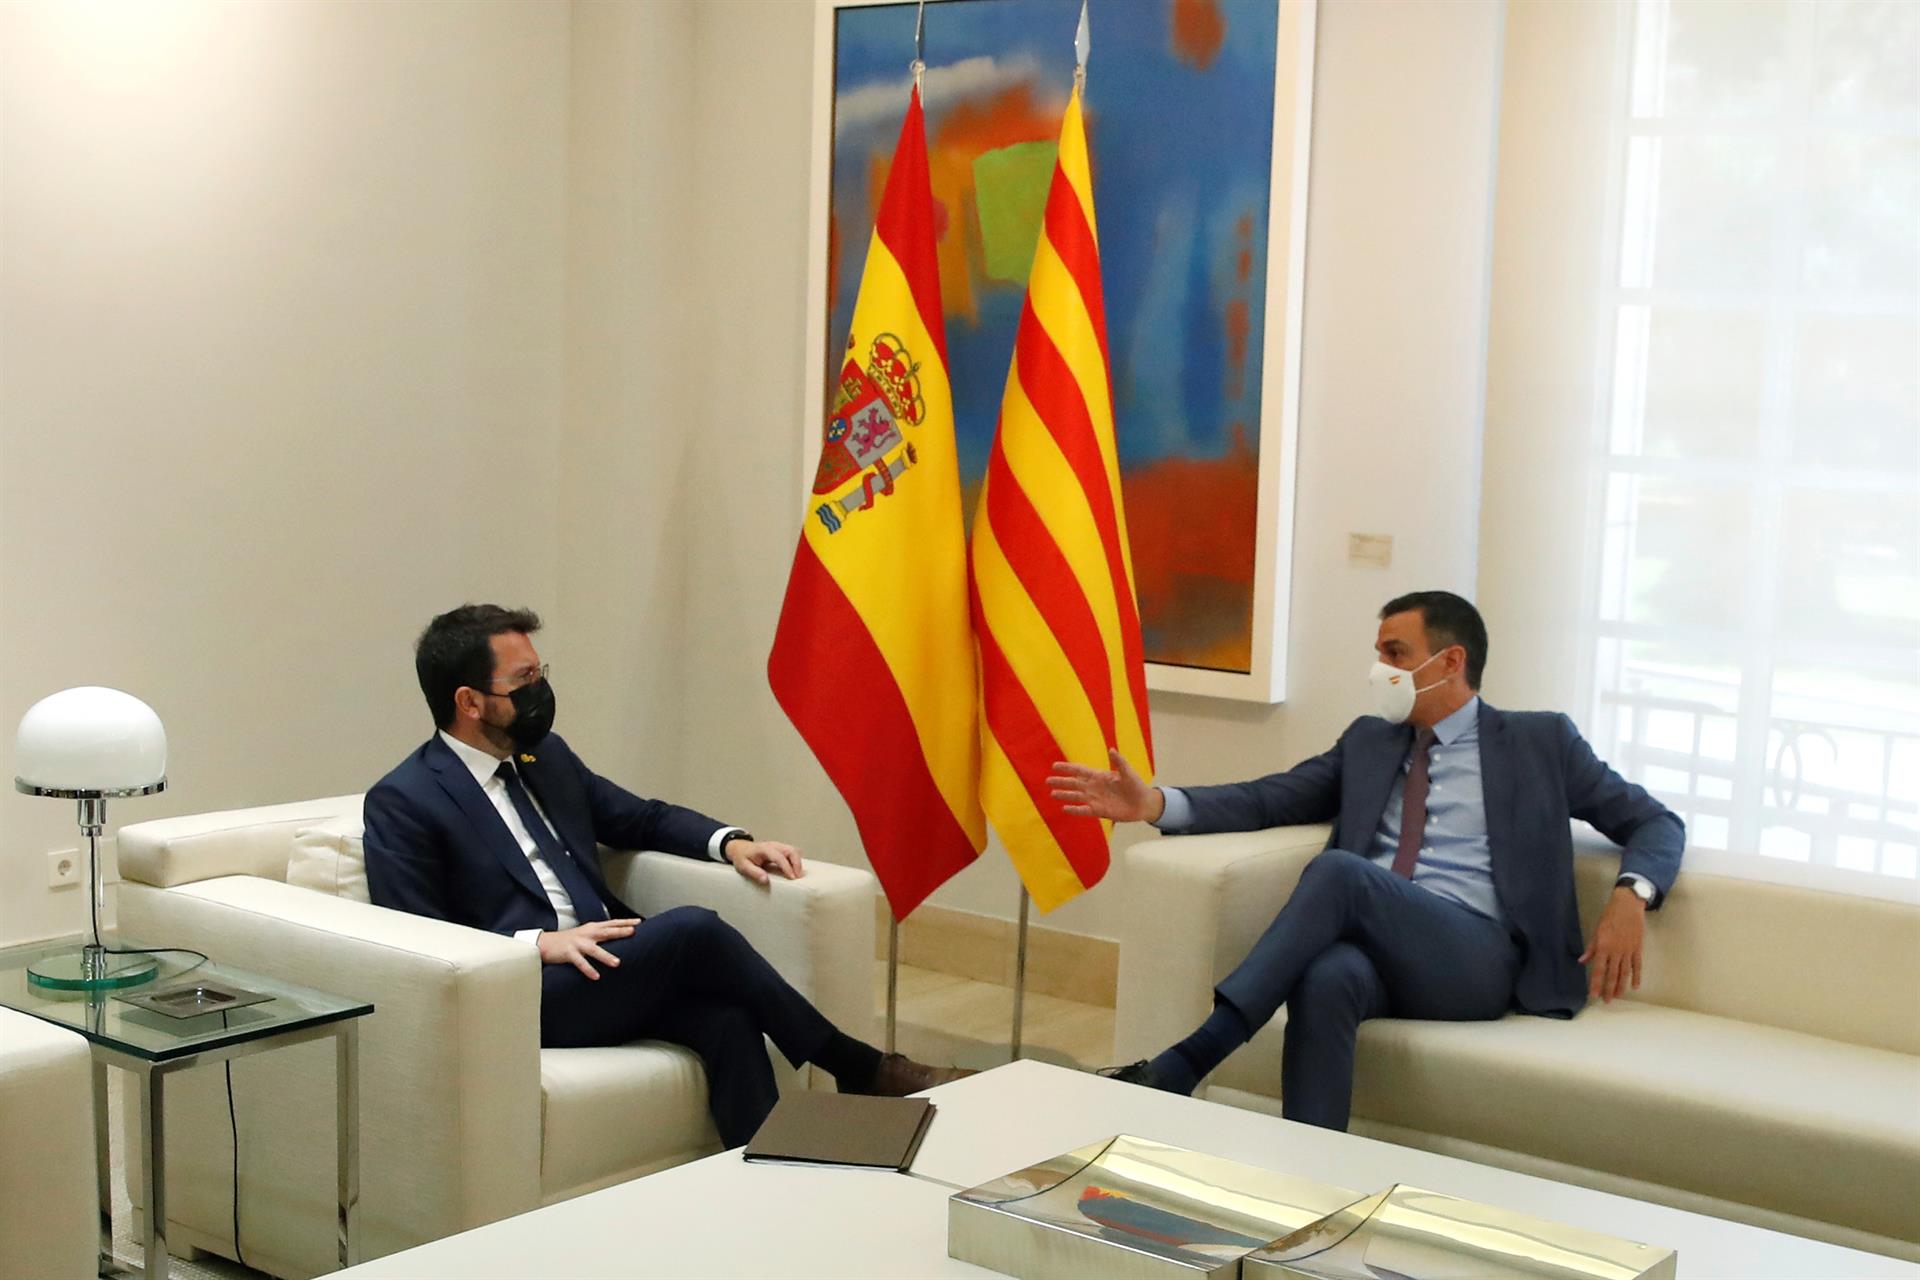 Aragonès will attend the dialogue table meeting whether Sánchez does or not